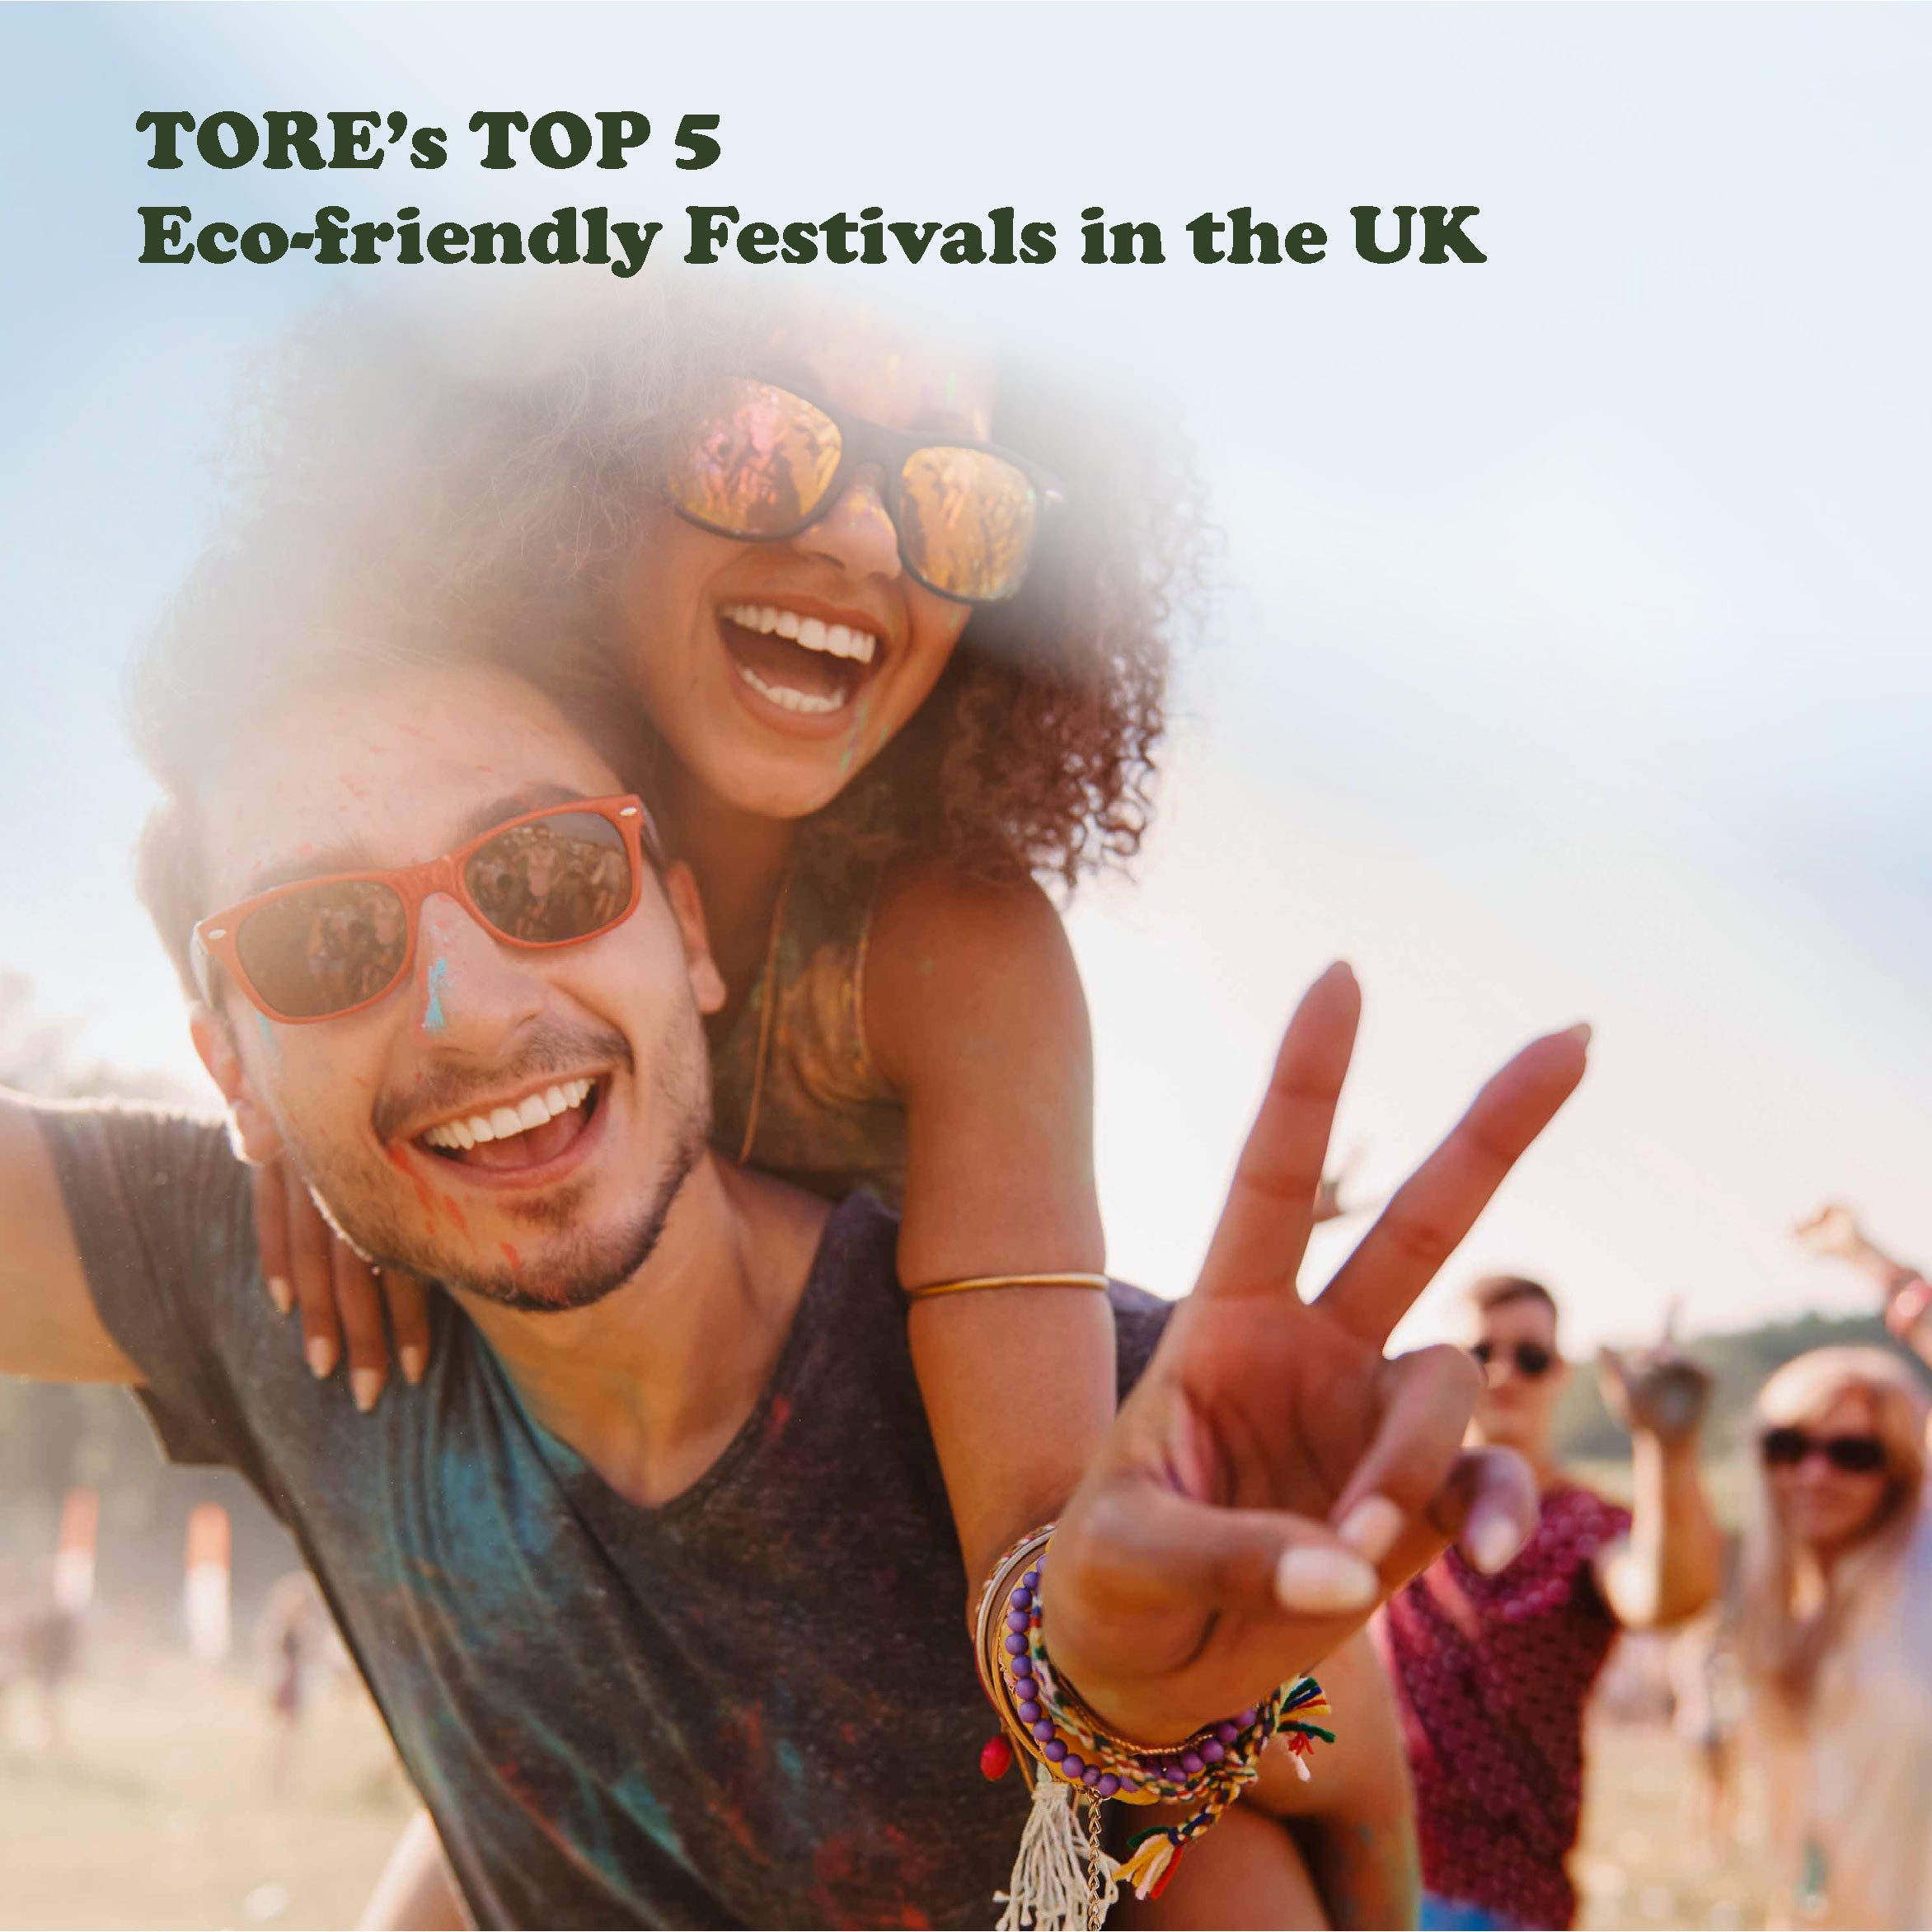 Tore's Top 5 Eco-Friendly Festivals in the UK